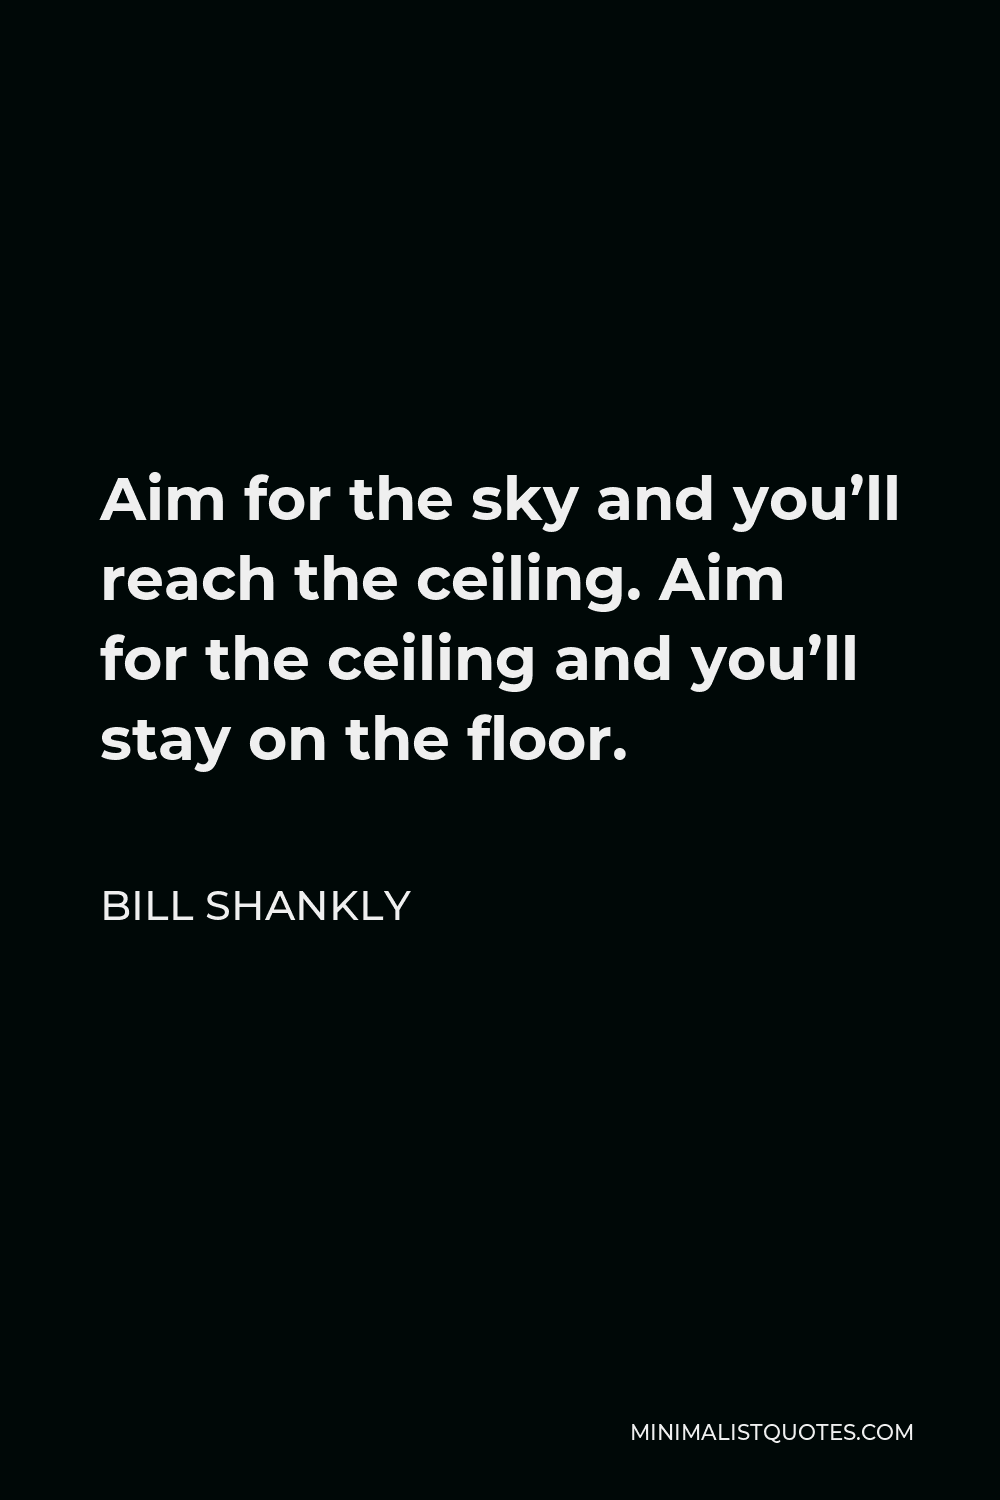 Bill Shankly Quote - Aim for the sky and you’ll reach the ceiling. Aim for the ceiling and you’ll stay on the floor.